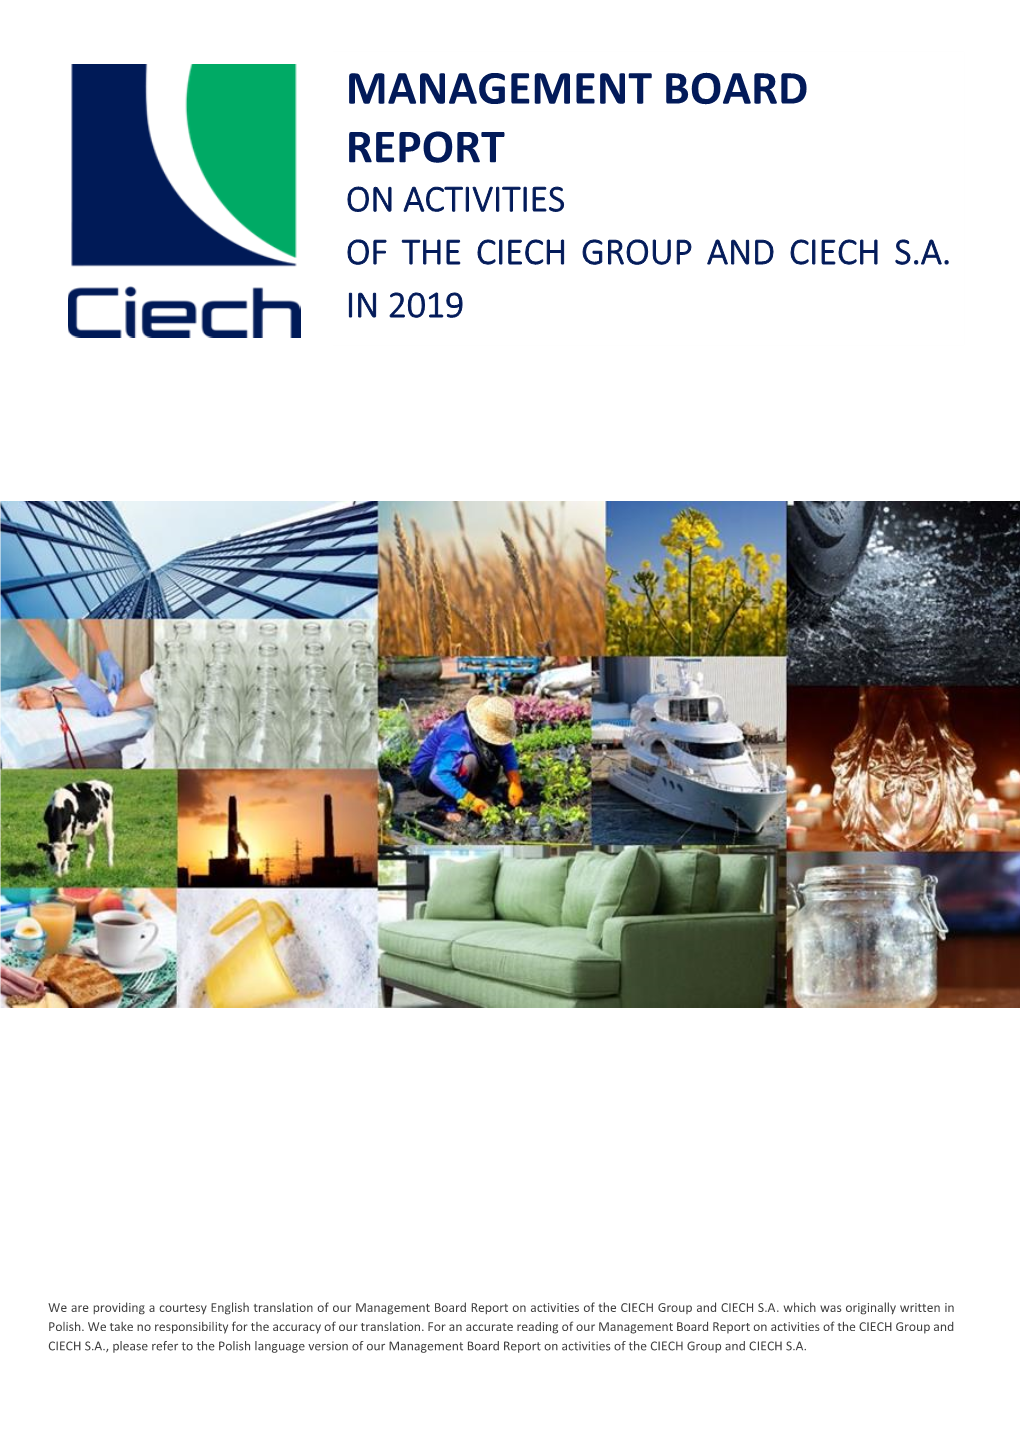 Management Board Report on Activities of the Ciech Group and Ciech S.A